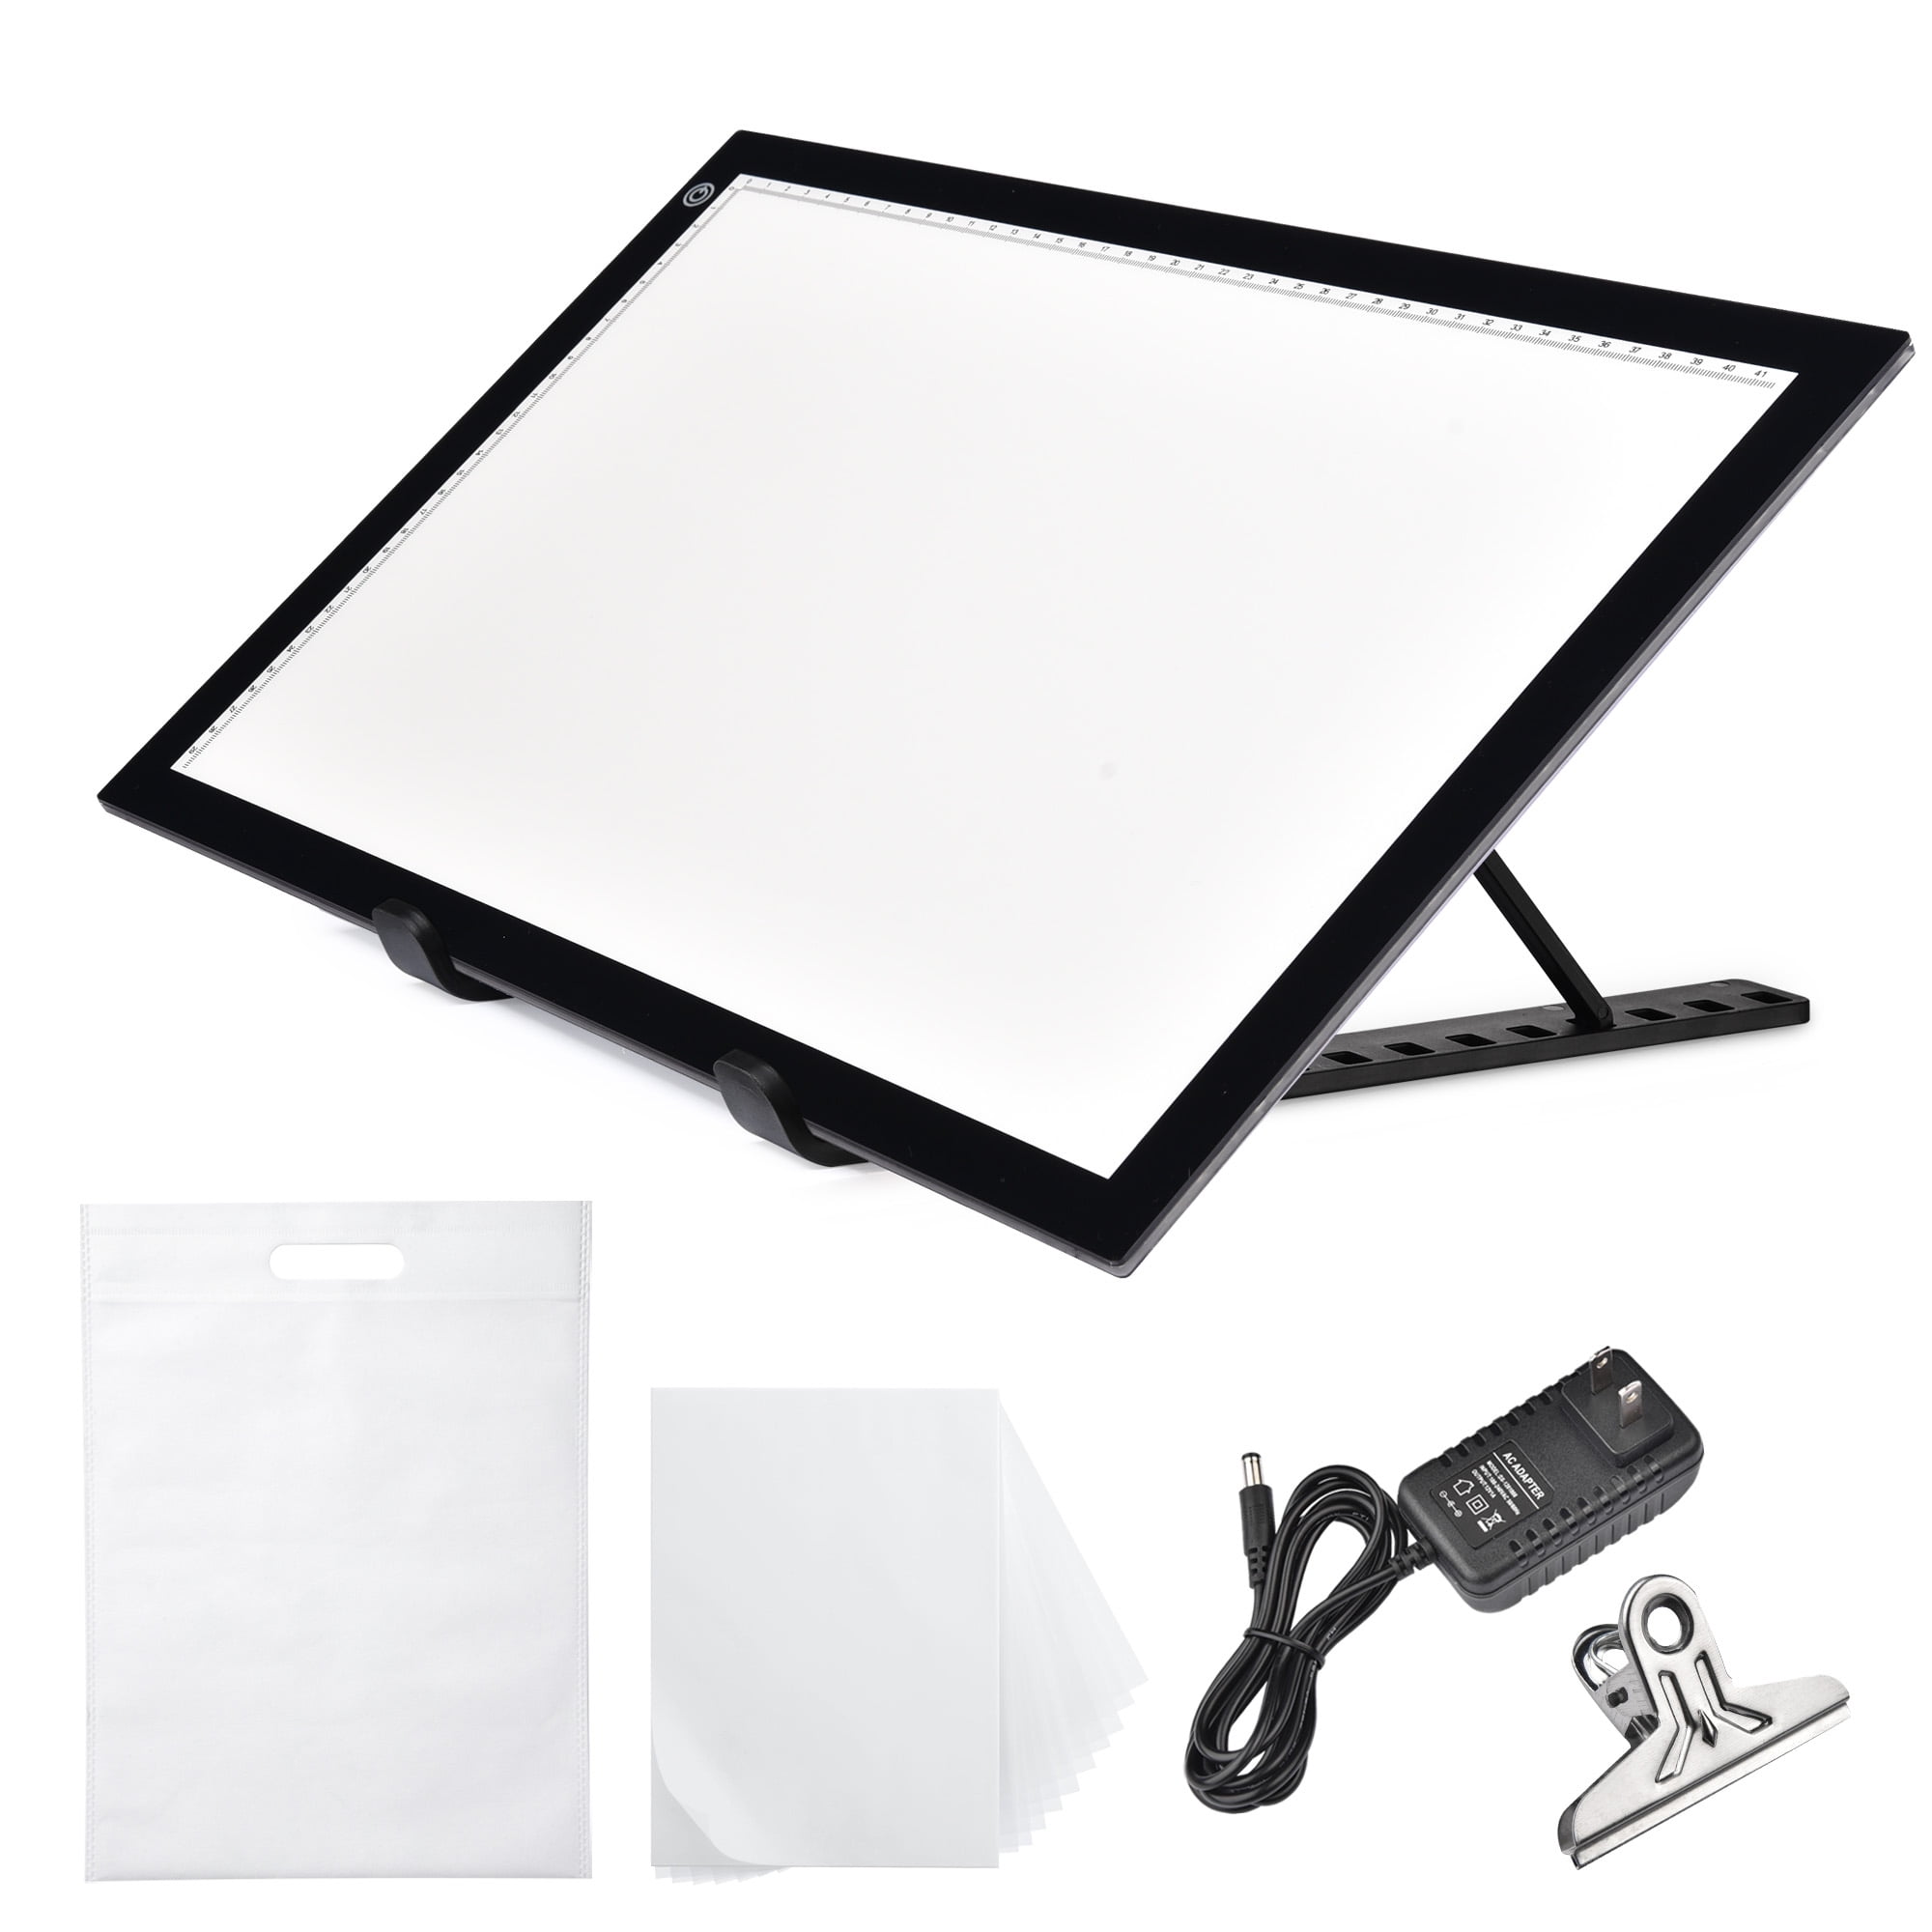 Yescom A3 LED Tracing Light Box with Stand 19